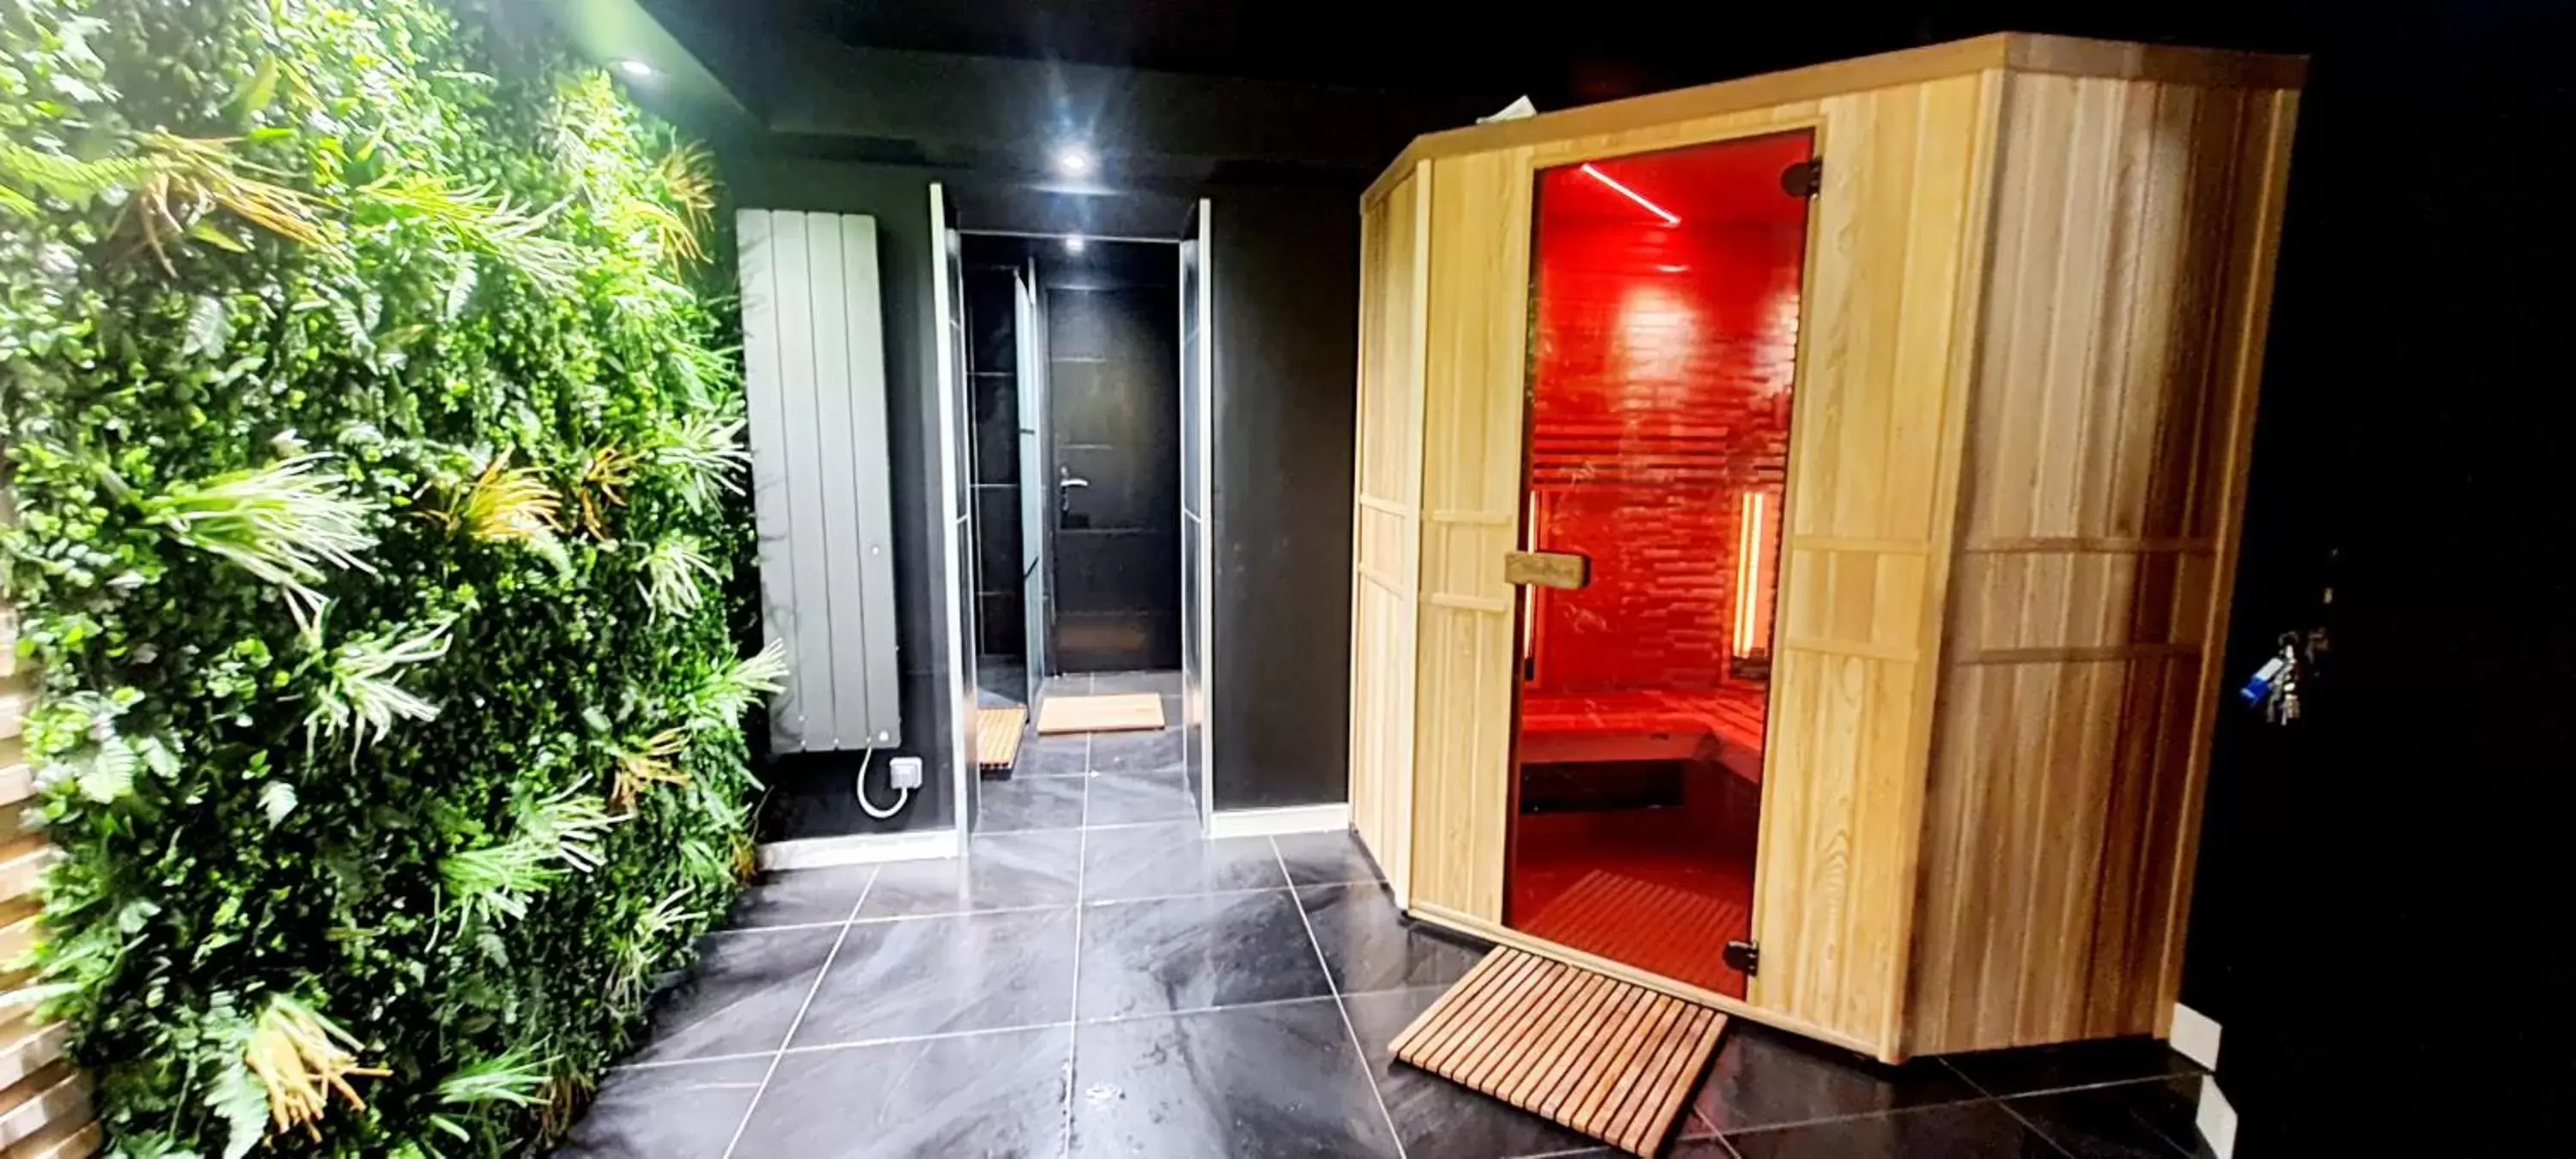 Sauna in Le Bras d'or Apparts et Spa